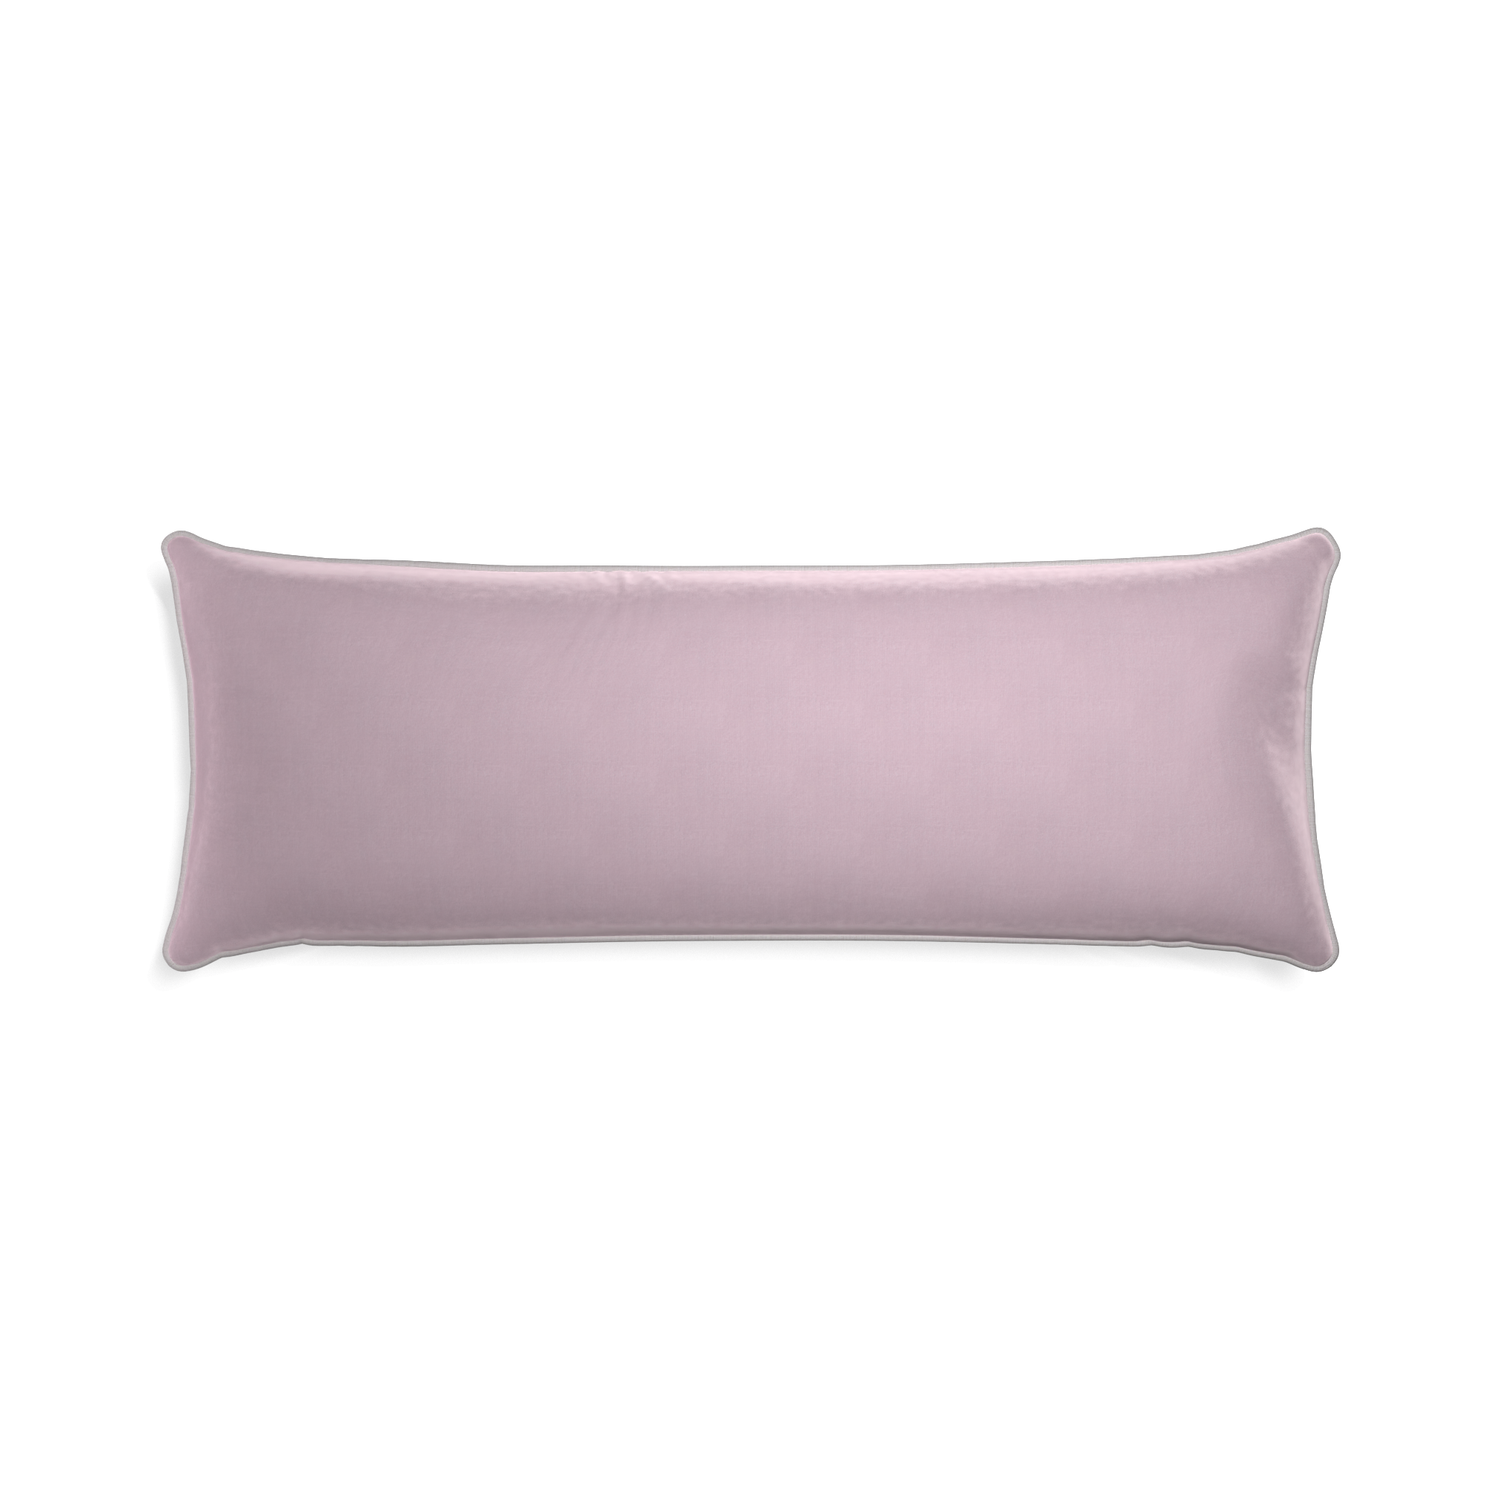 Xl-lumbar lilac velvet custom pillow with pebble piping on white background